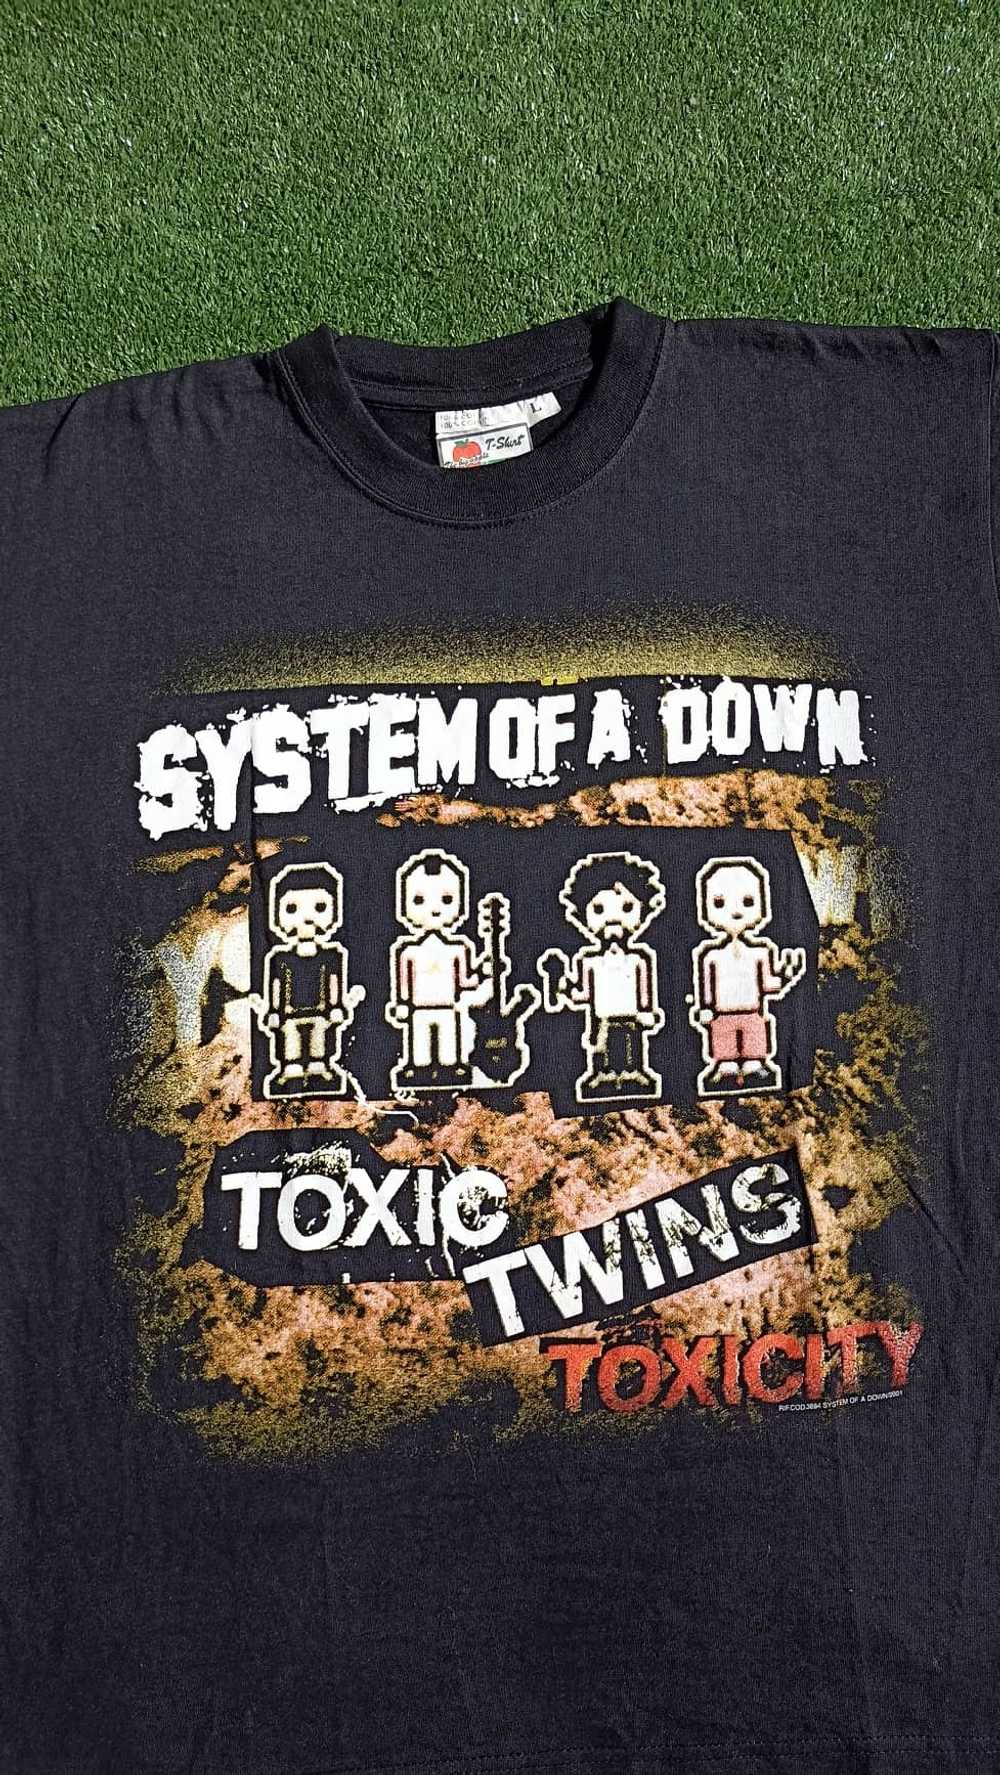 System of a down toxic twins 2001 vintage tshirt - image 3